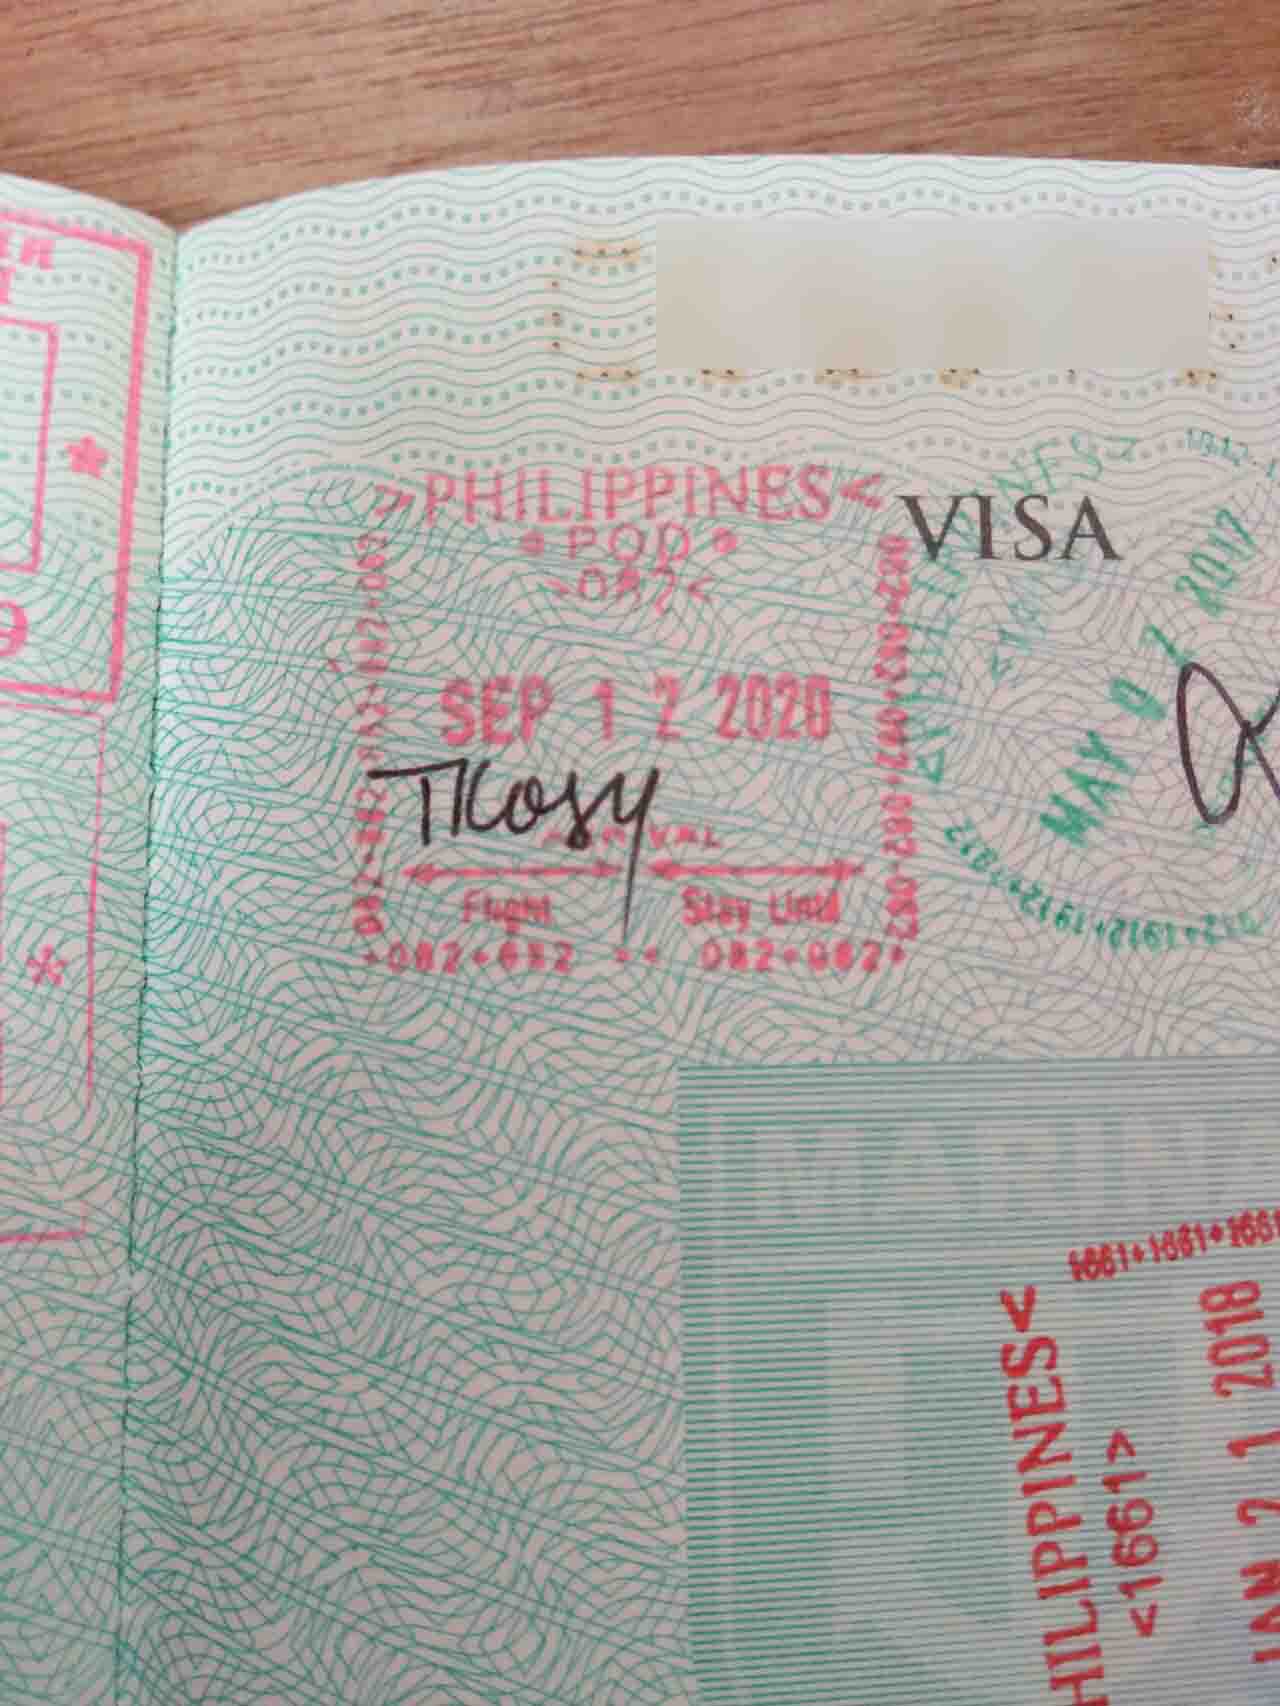 Proof of latest arrival in the Philippines (Arrival Stamp)